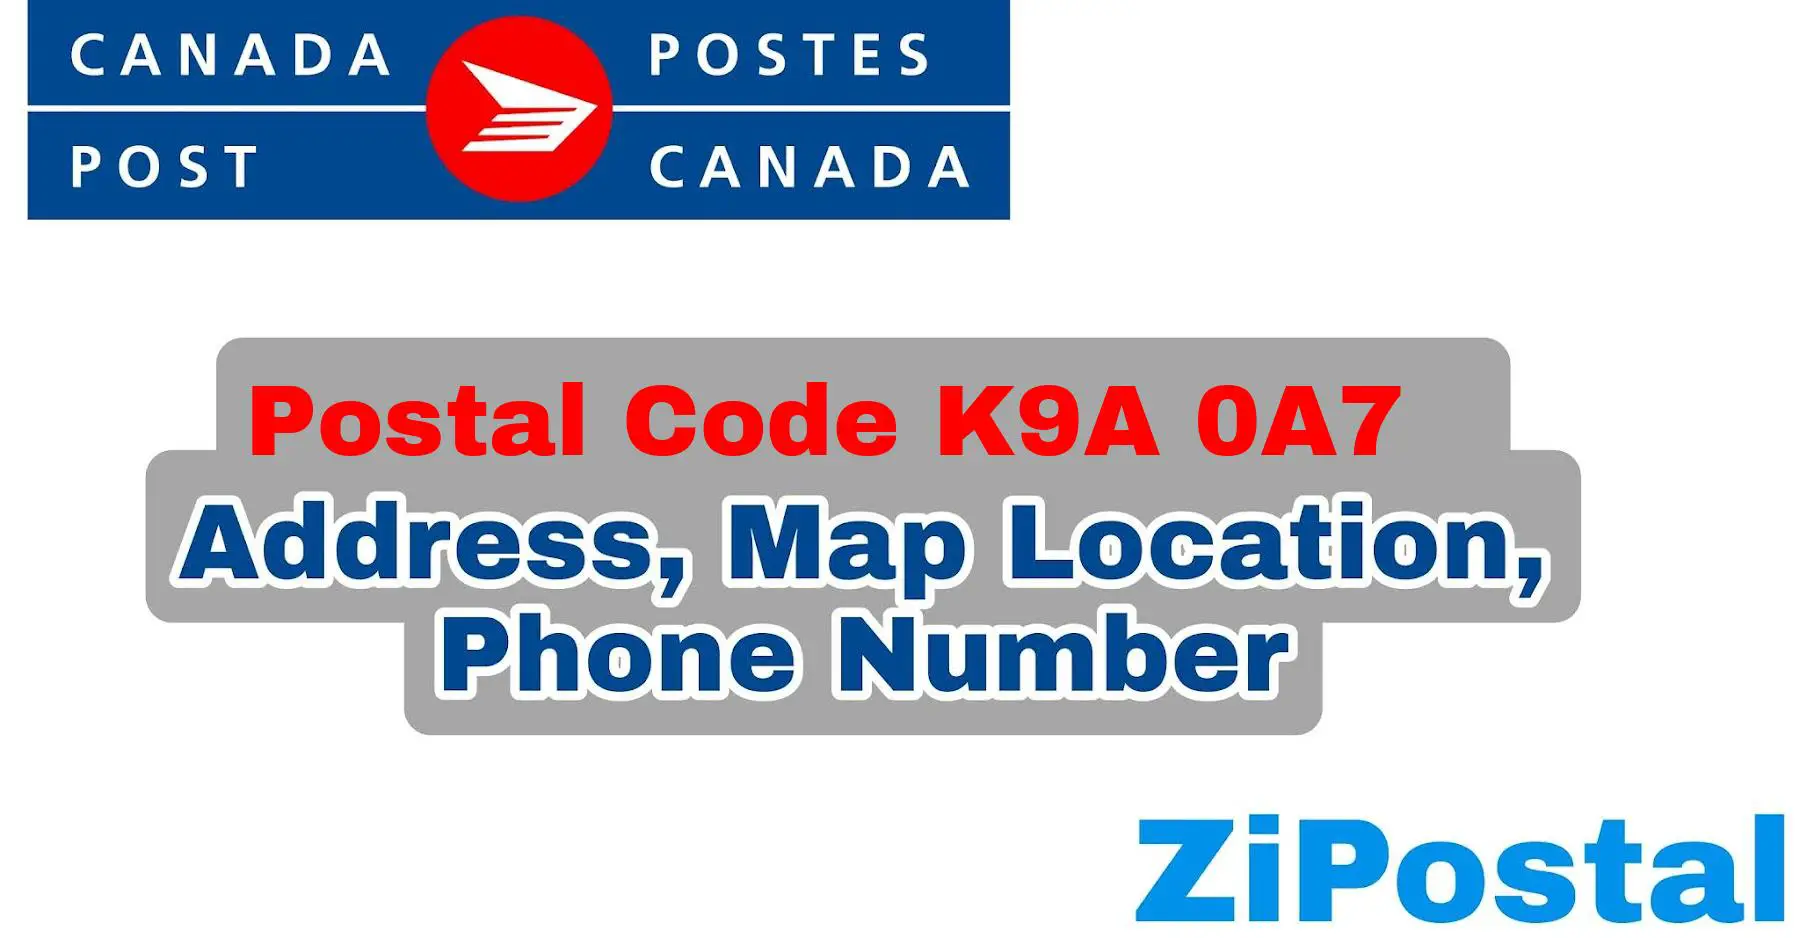 Postal Code K9A 0A7 Address Map Location and Phone Number